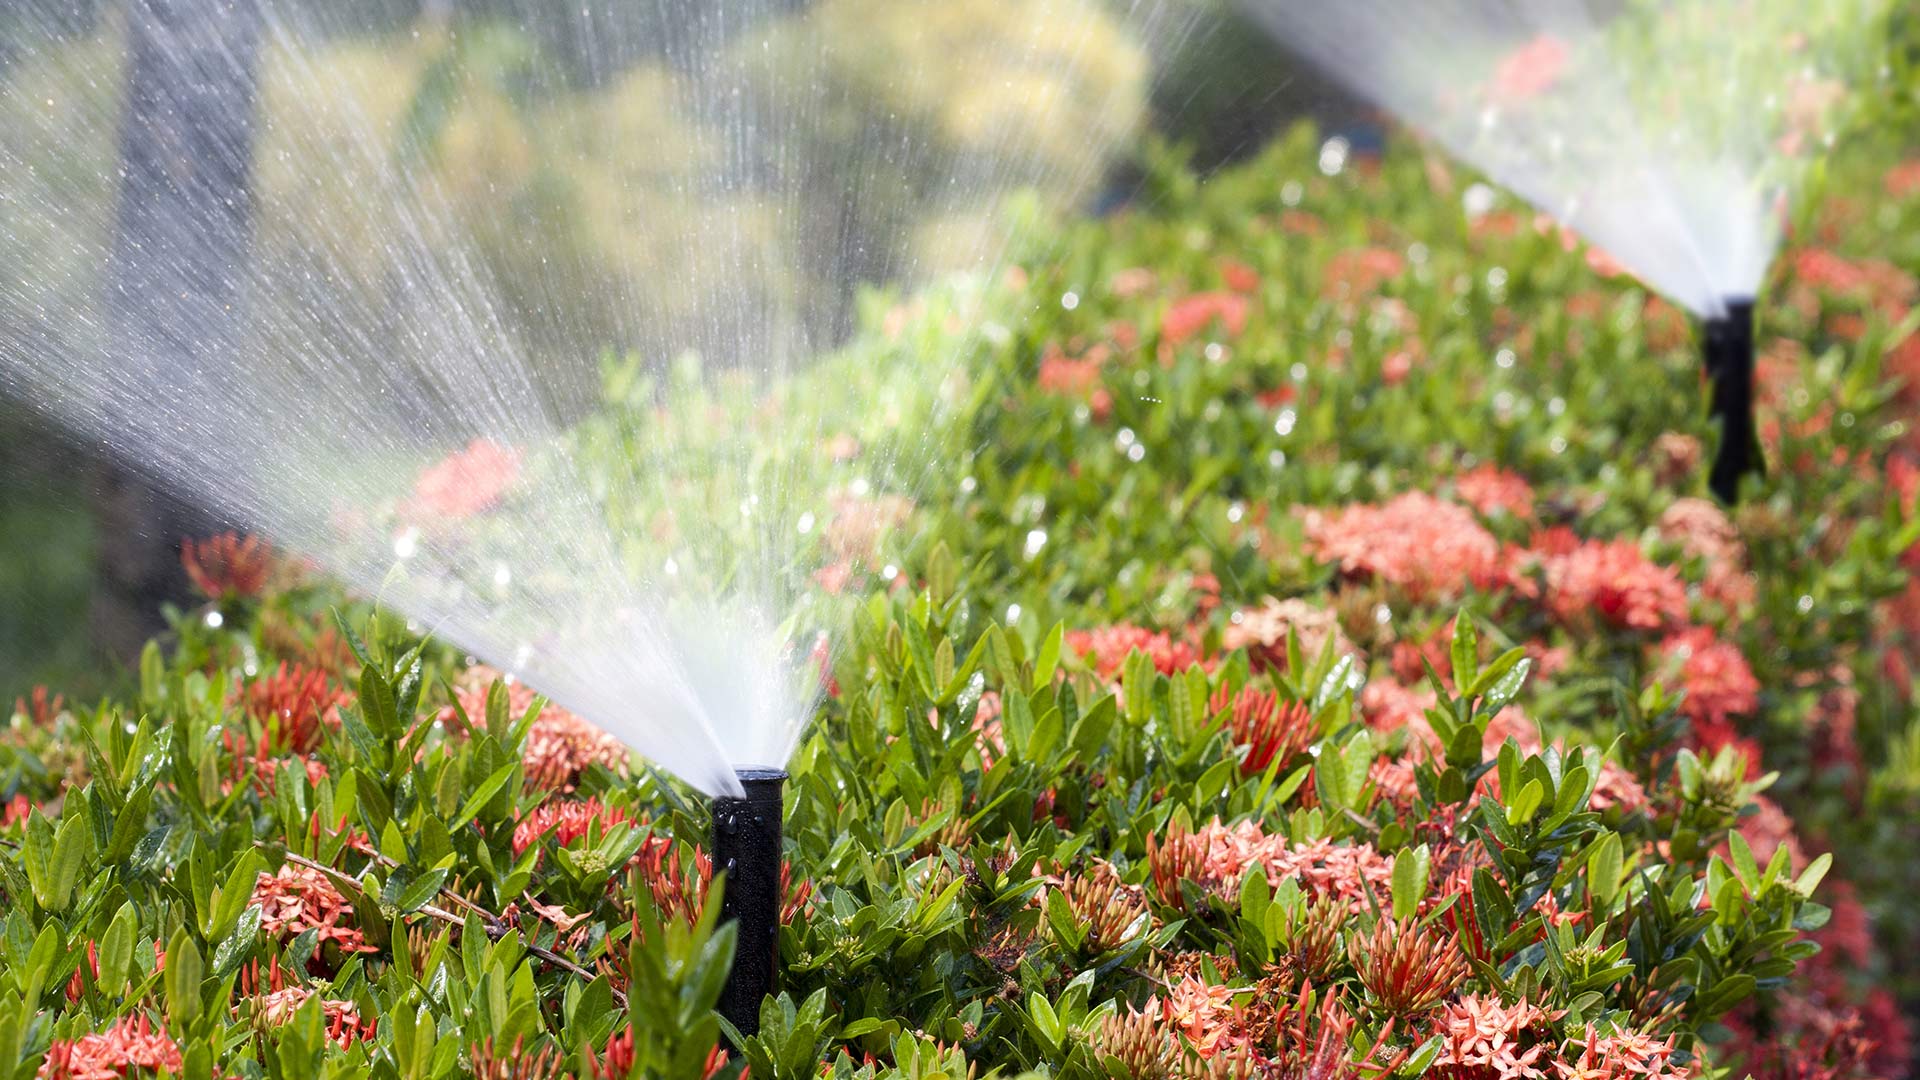 Sprinkler praying shrubs with fertilizer with the sun light reflecting off of the liquid.